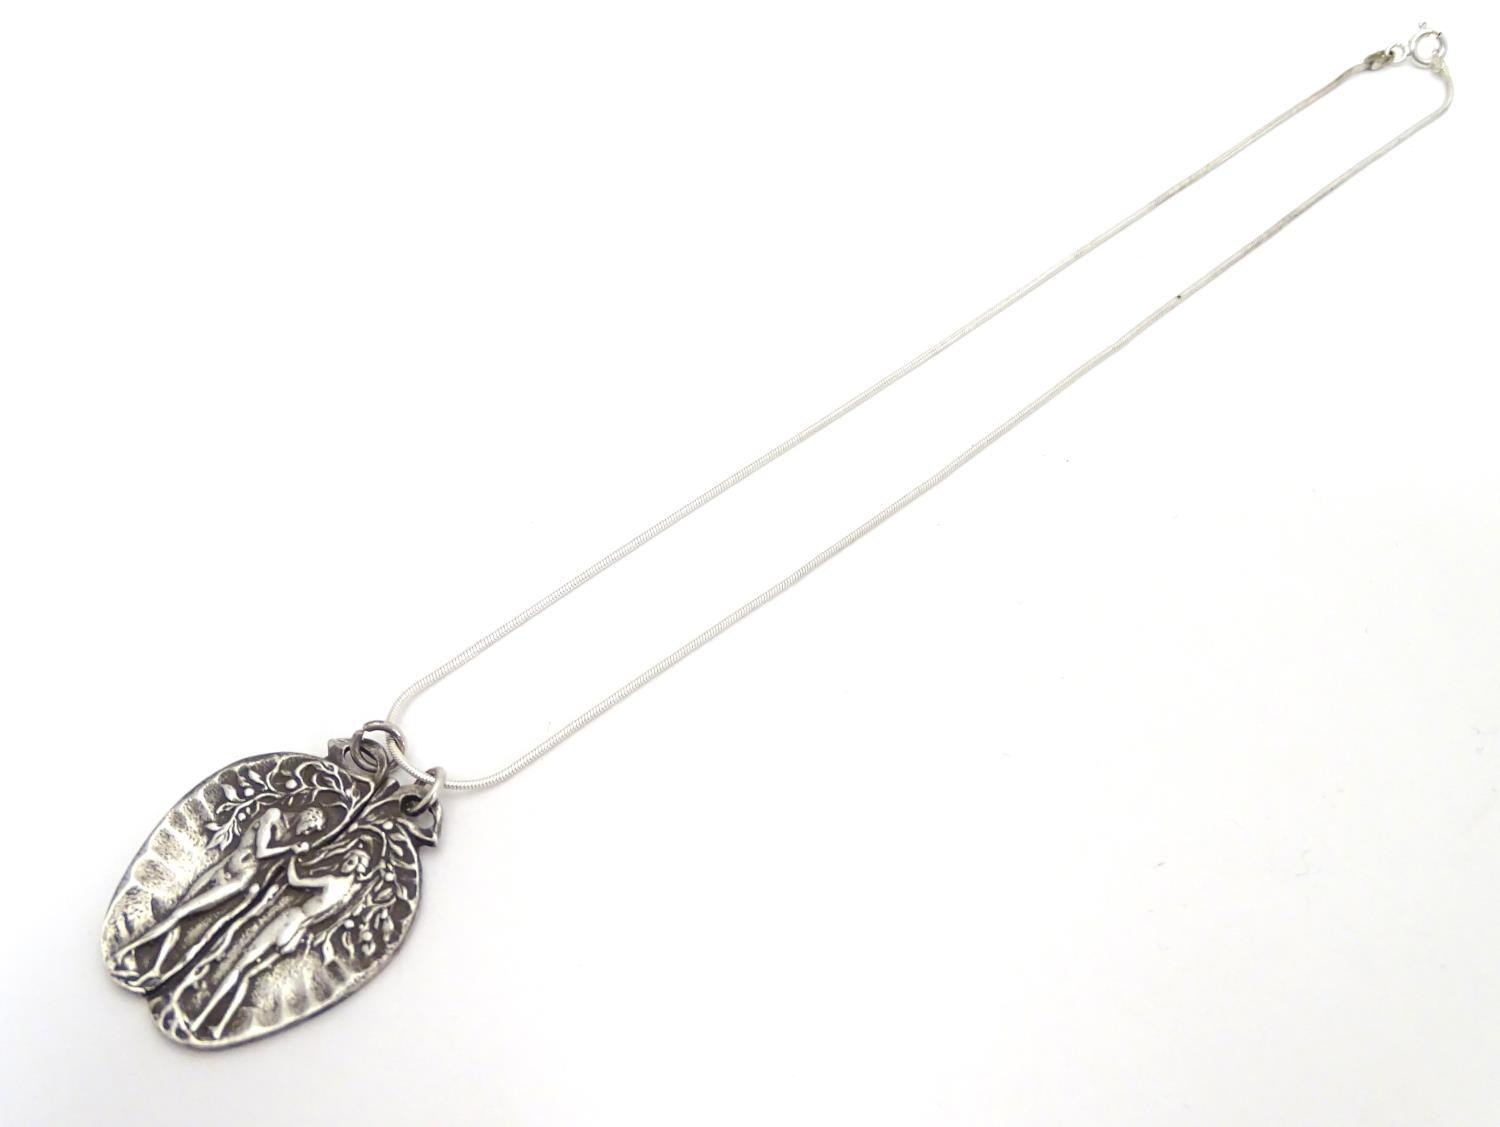 A silver pendant on chain, the pendant formed as an apple with a depiction of Adam and Eve. - Image 3 of 5